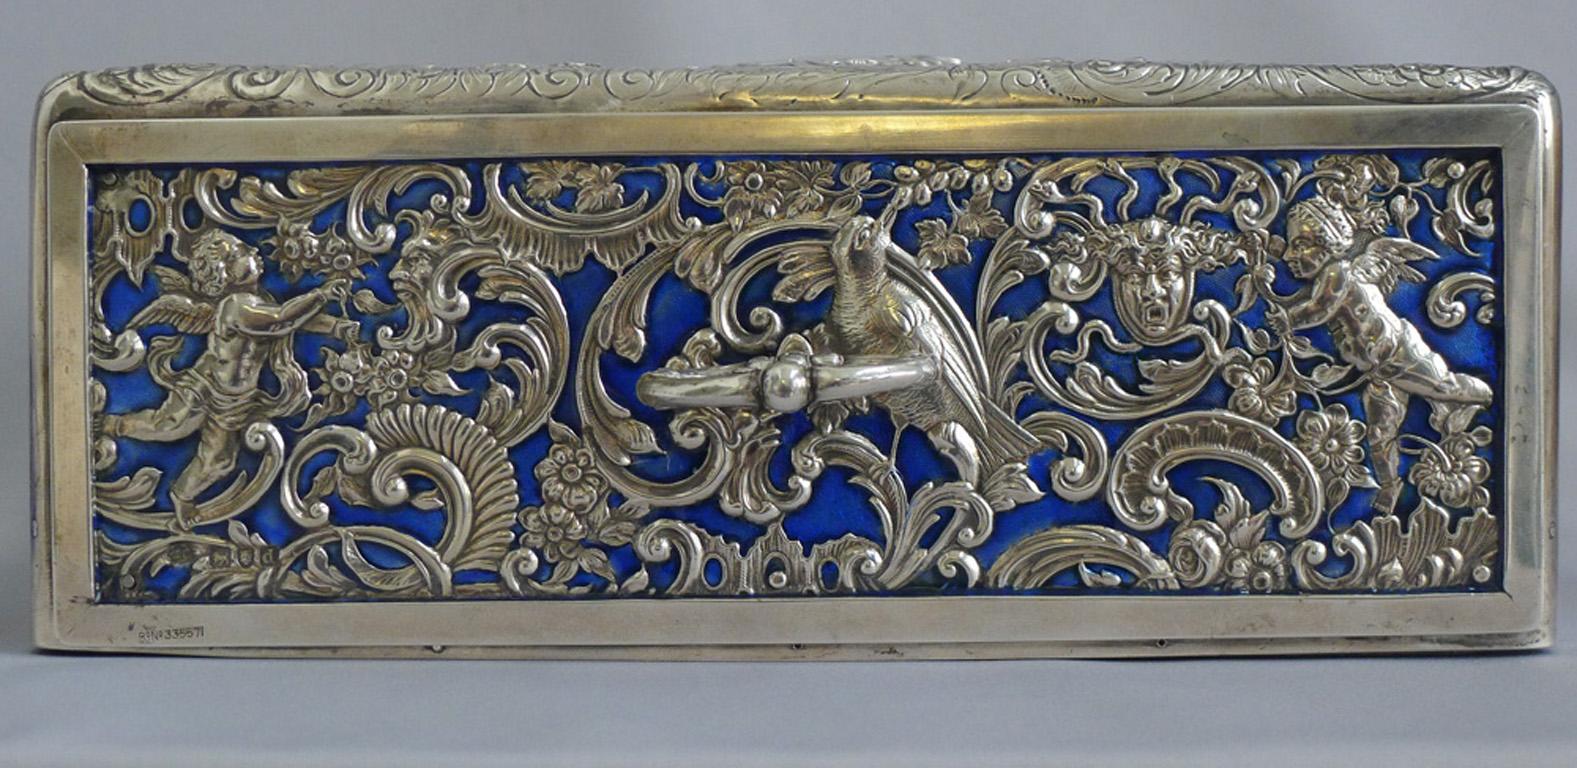 Late 19th Century Superb English Silver and Enamel Casket by William Comyns